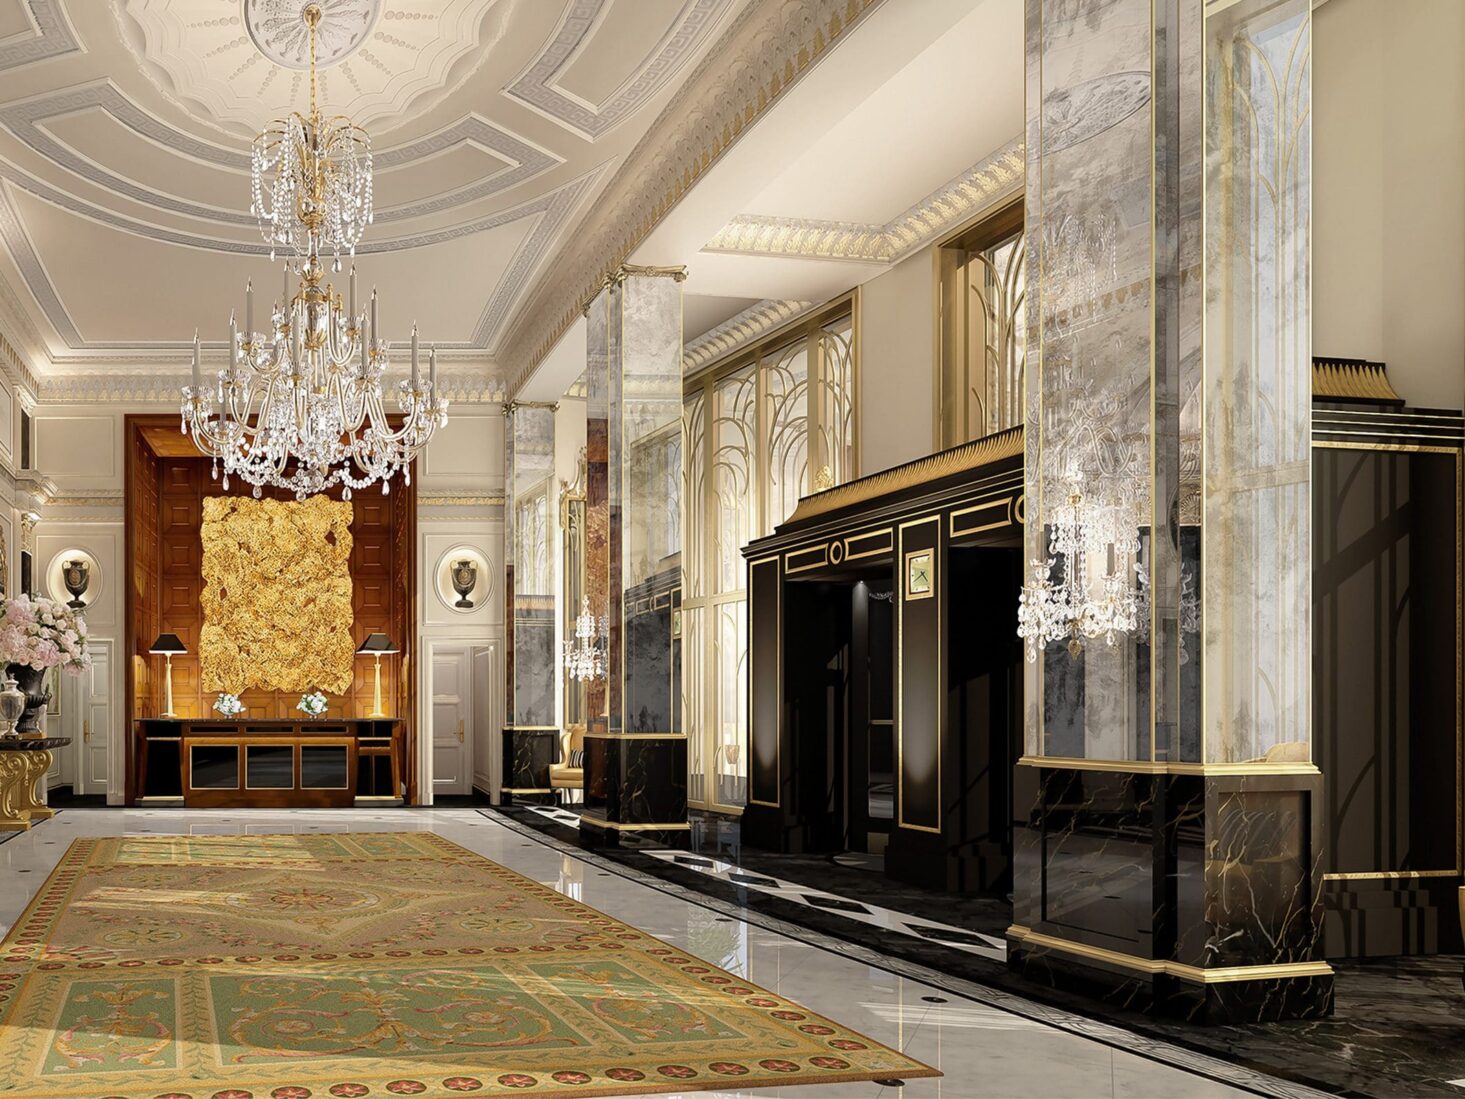 The renovated lobby at The Dorchester by Pierre-Yves Rochon